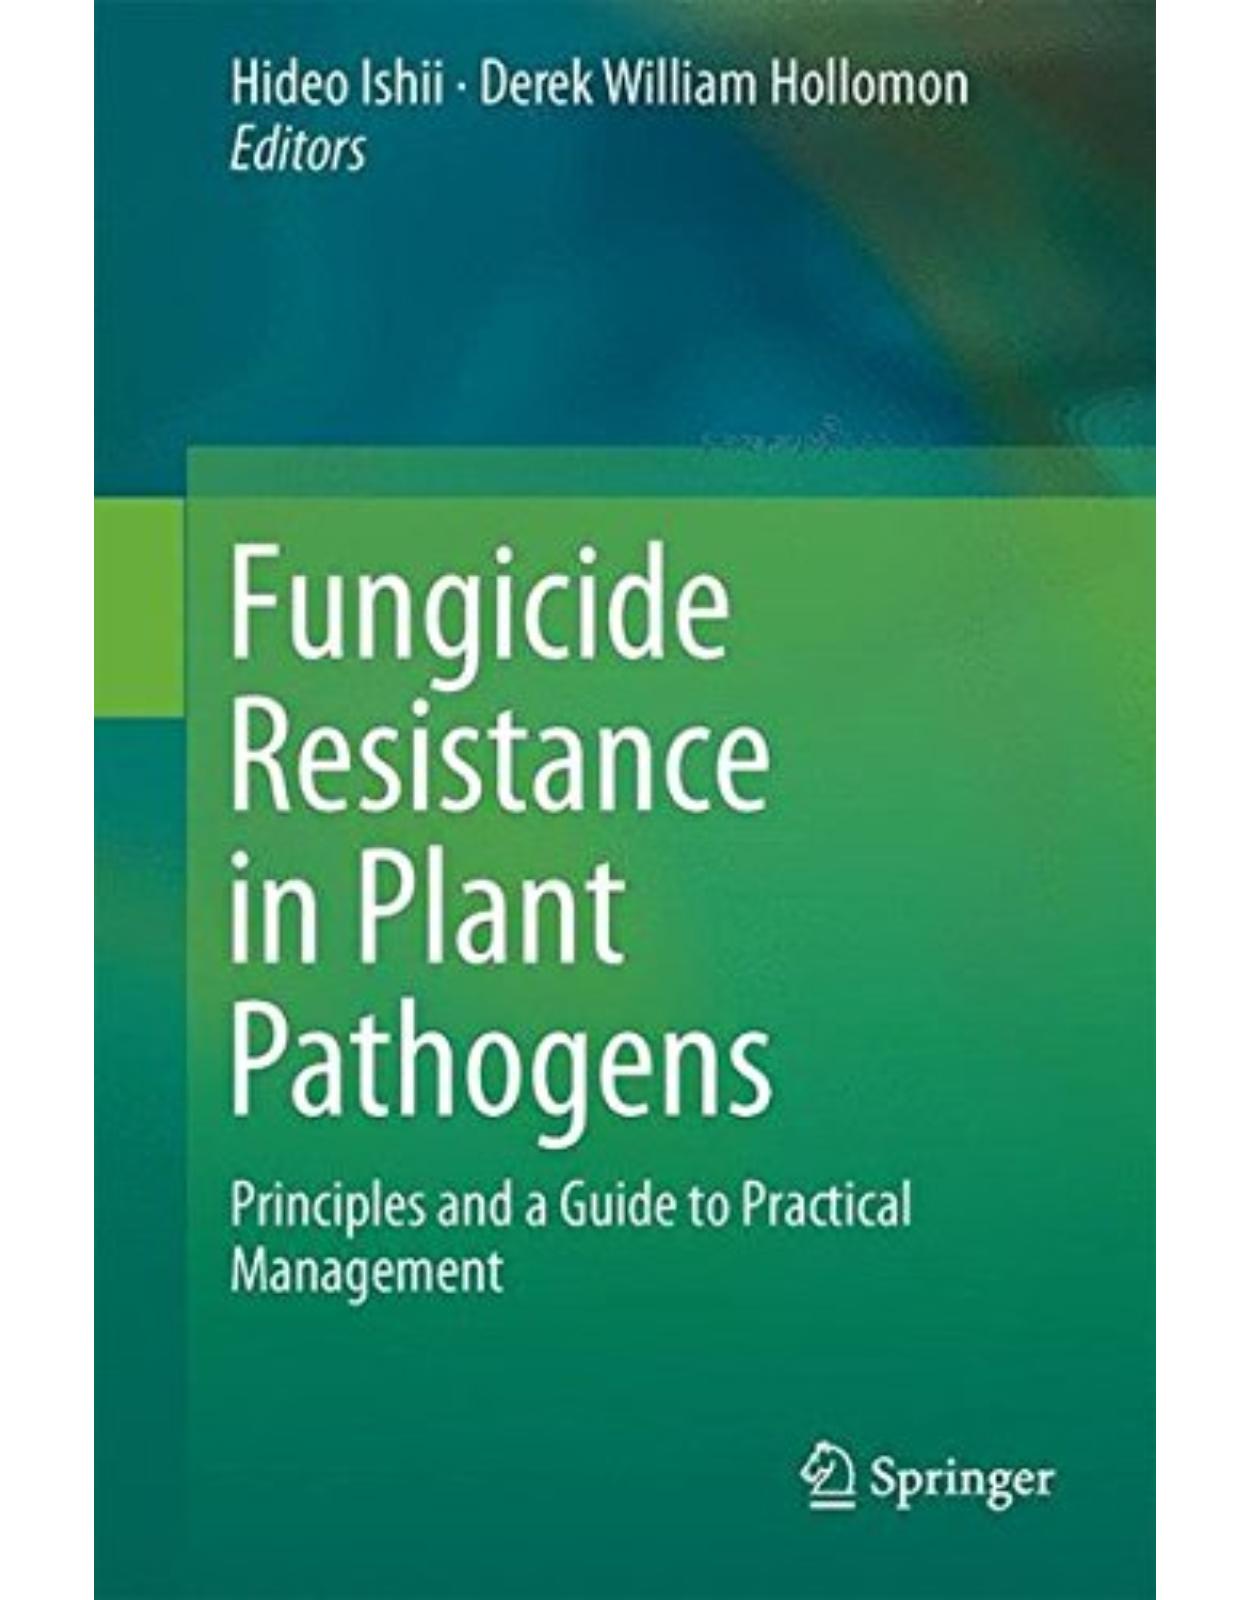 Fungicide Resistance in Plant Pathogens